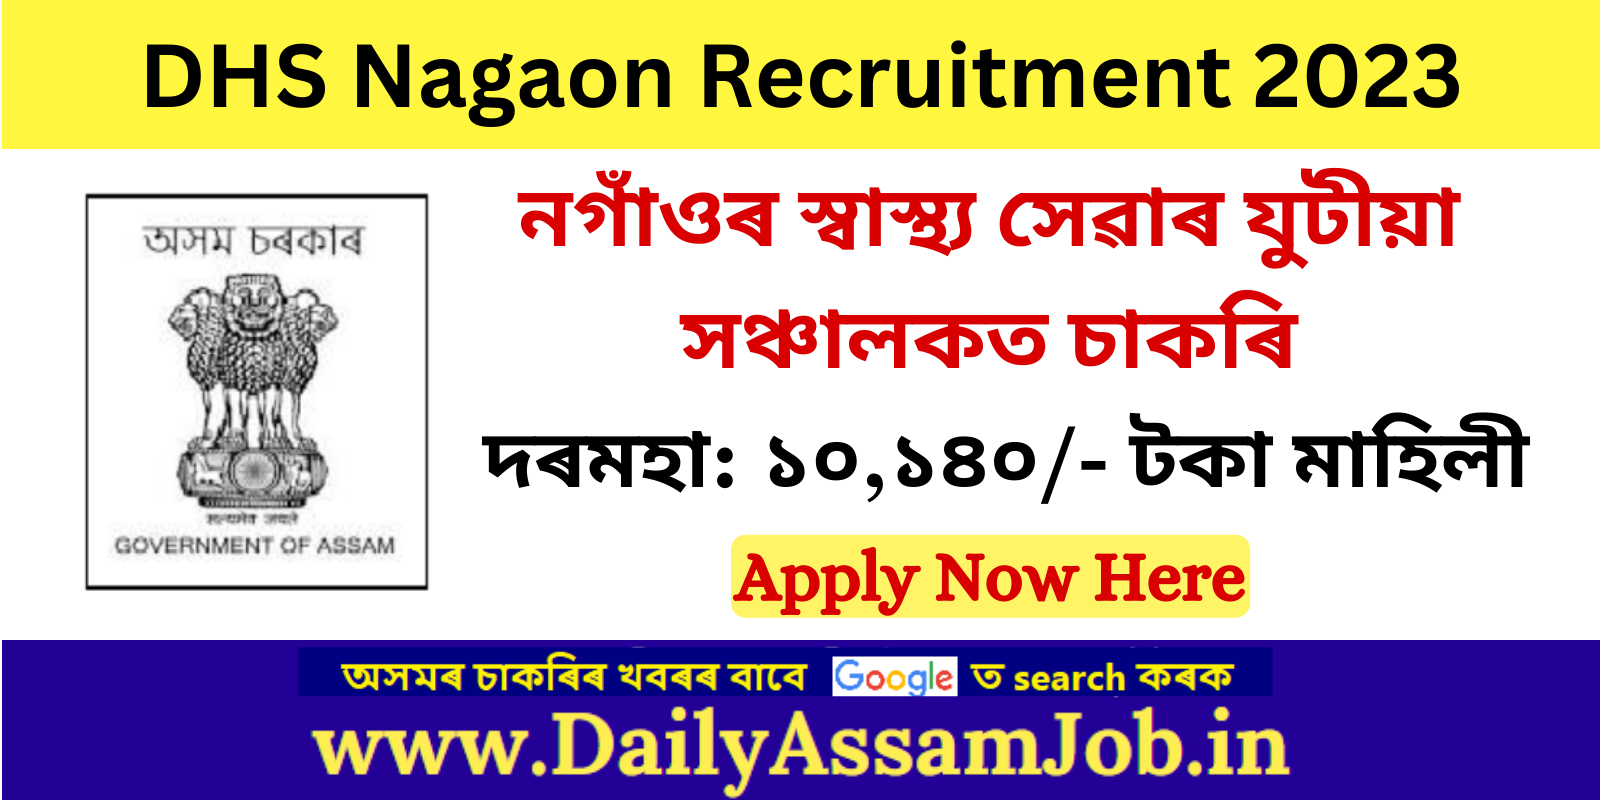 Assam Career :: District Health Services Nagaon Recruitment 2023 for Support Staff Vacancy